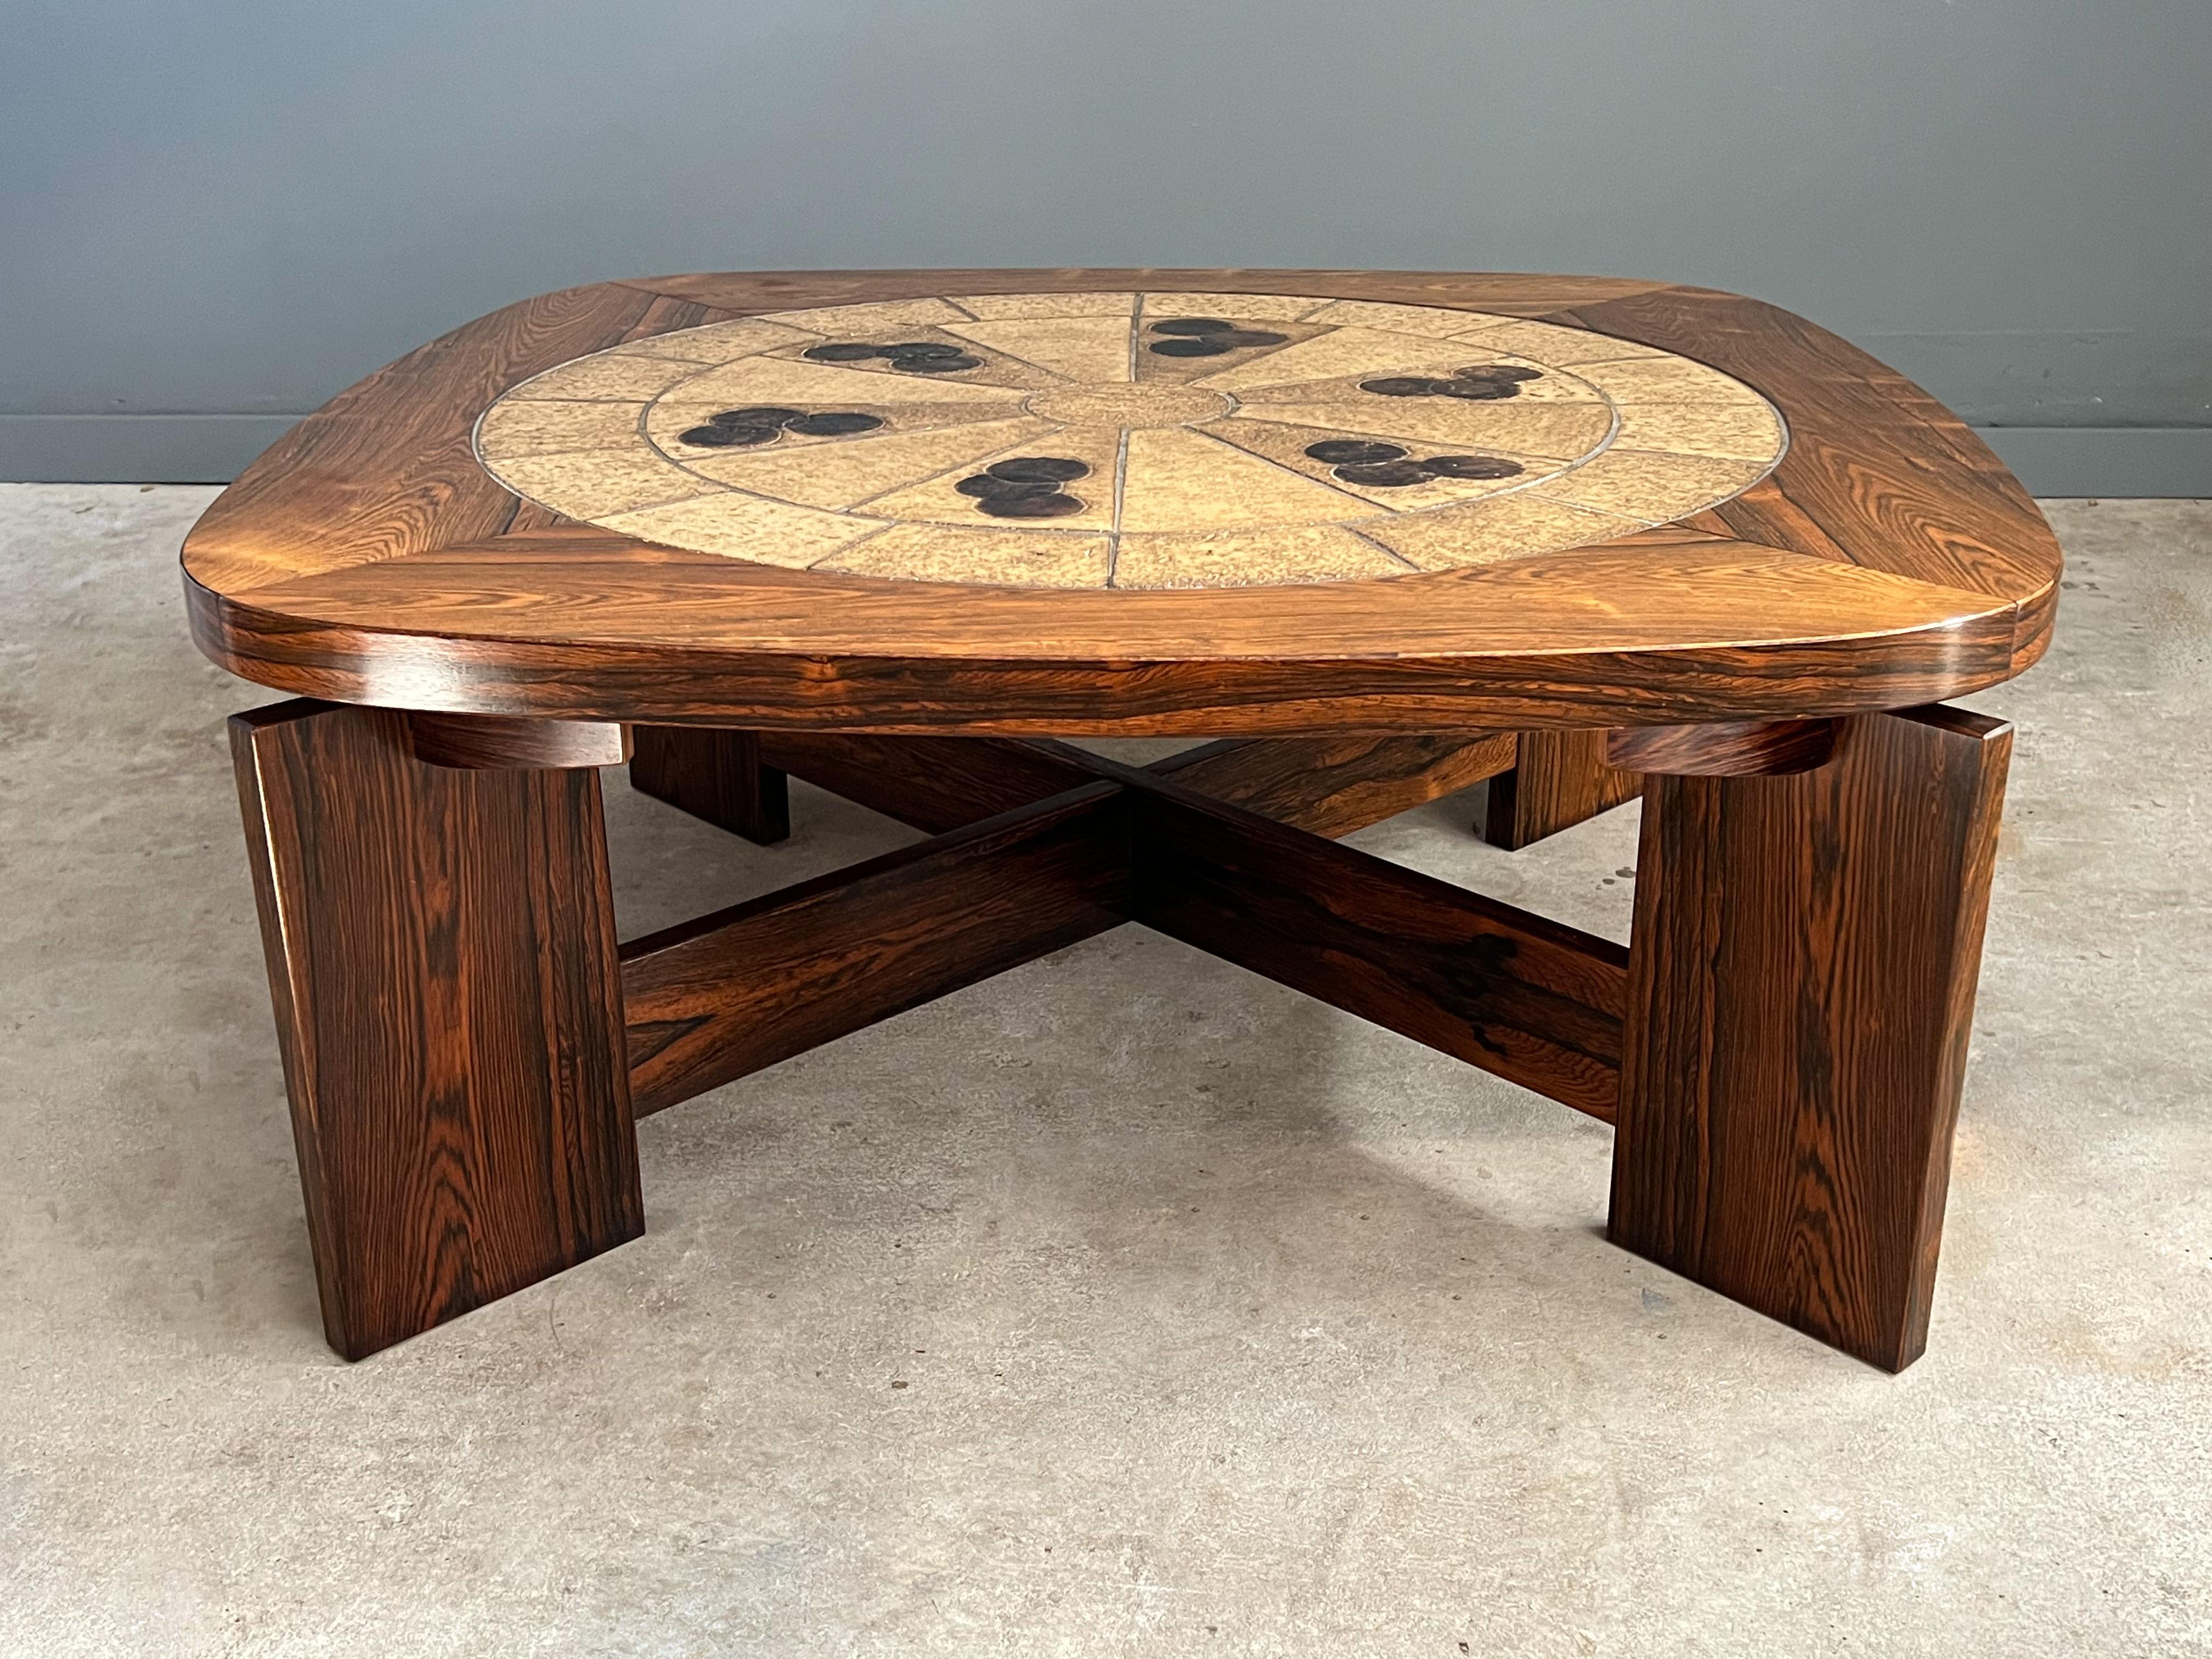 Brazilian rosewood and tile coffee attributed to Tue Poulsen, Denmark 1970s. This amazing example shows off an abstract ceramic pattern in warm neutral colors and is complemented by the Brazilian rosewood grain. The base is architectural in form,